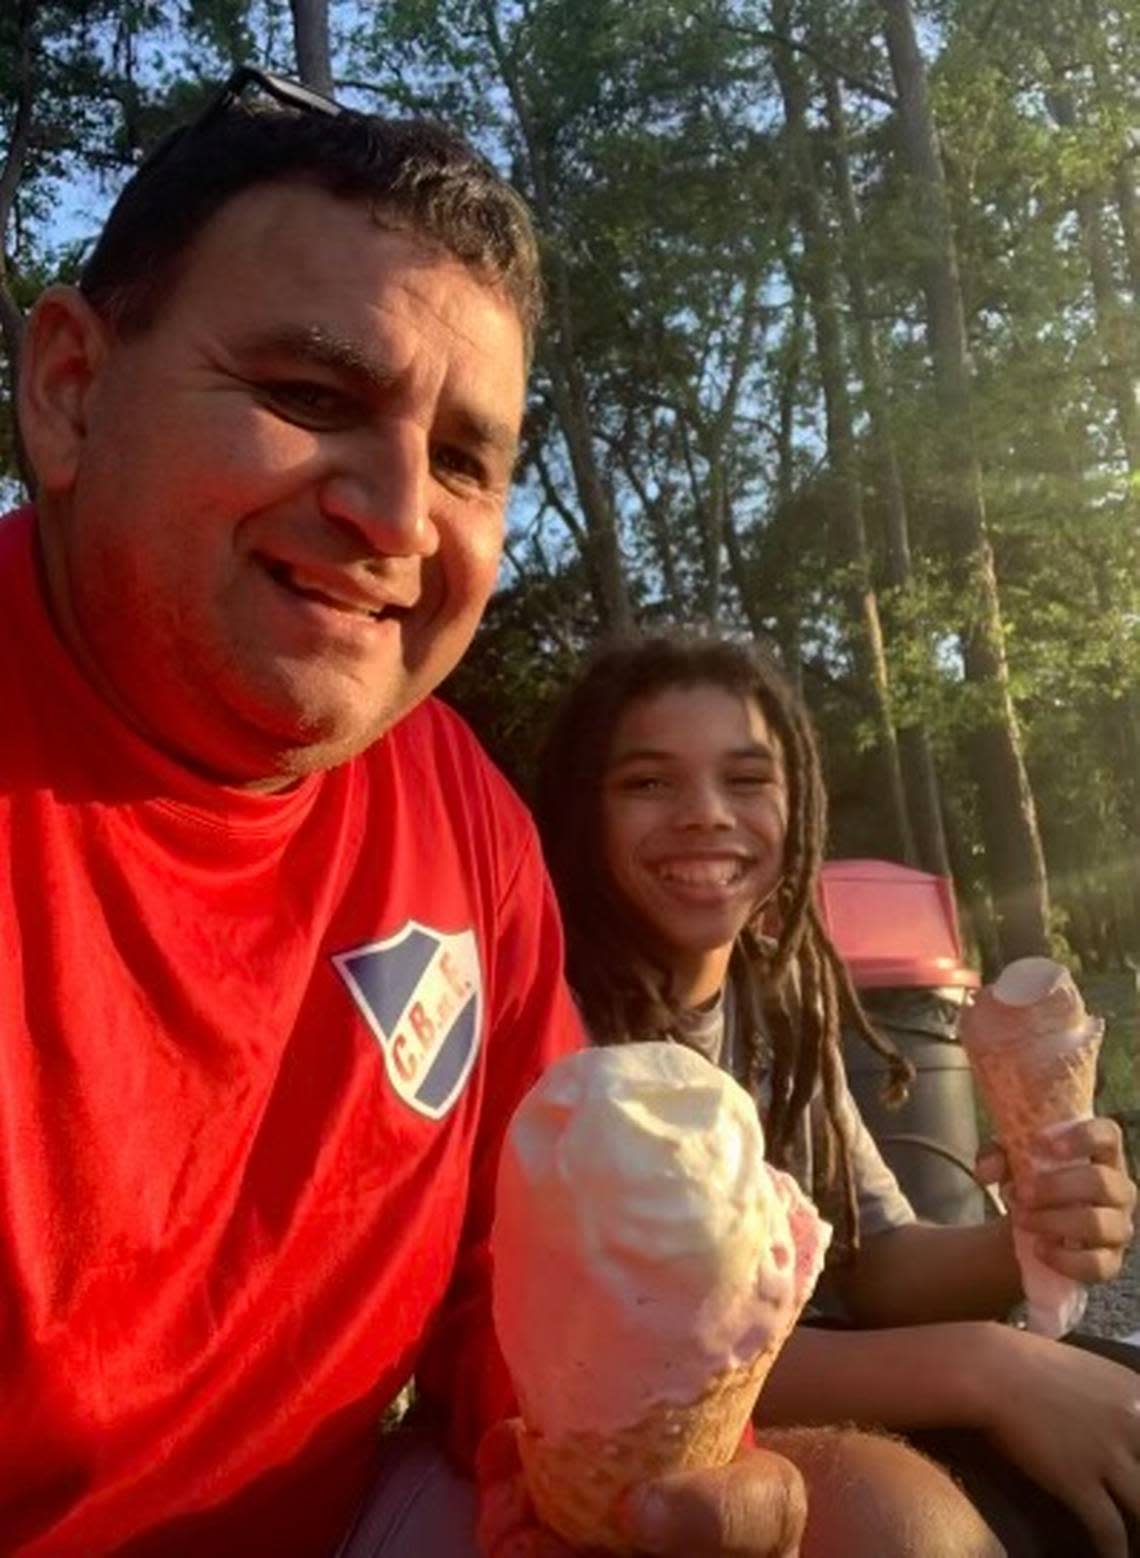 Coming home from soccer practice, L.J. and Coach Imer Hernandez took occasional visits to Bruster’s Ice Cream, located on Robert Smalls Parkway in Beaufort.